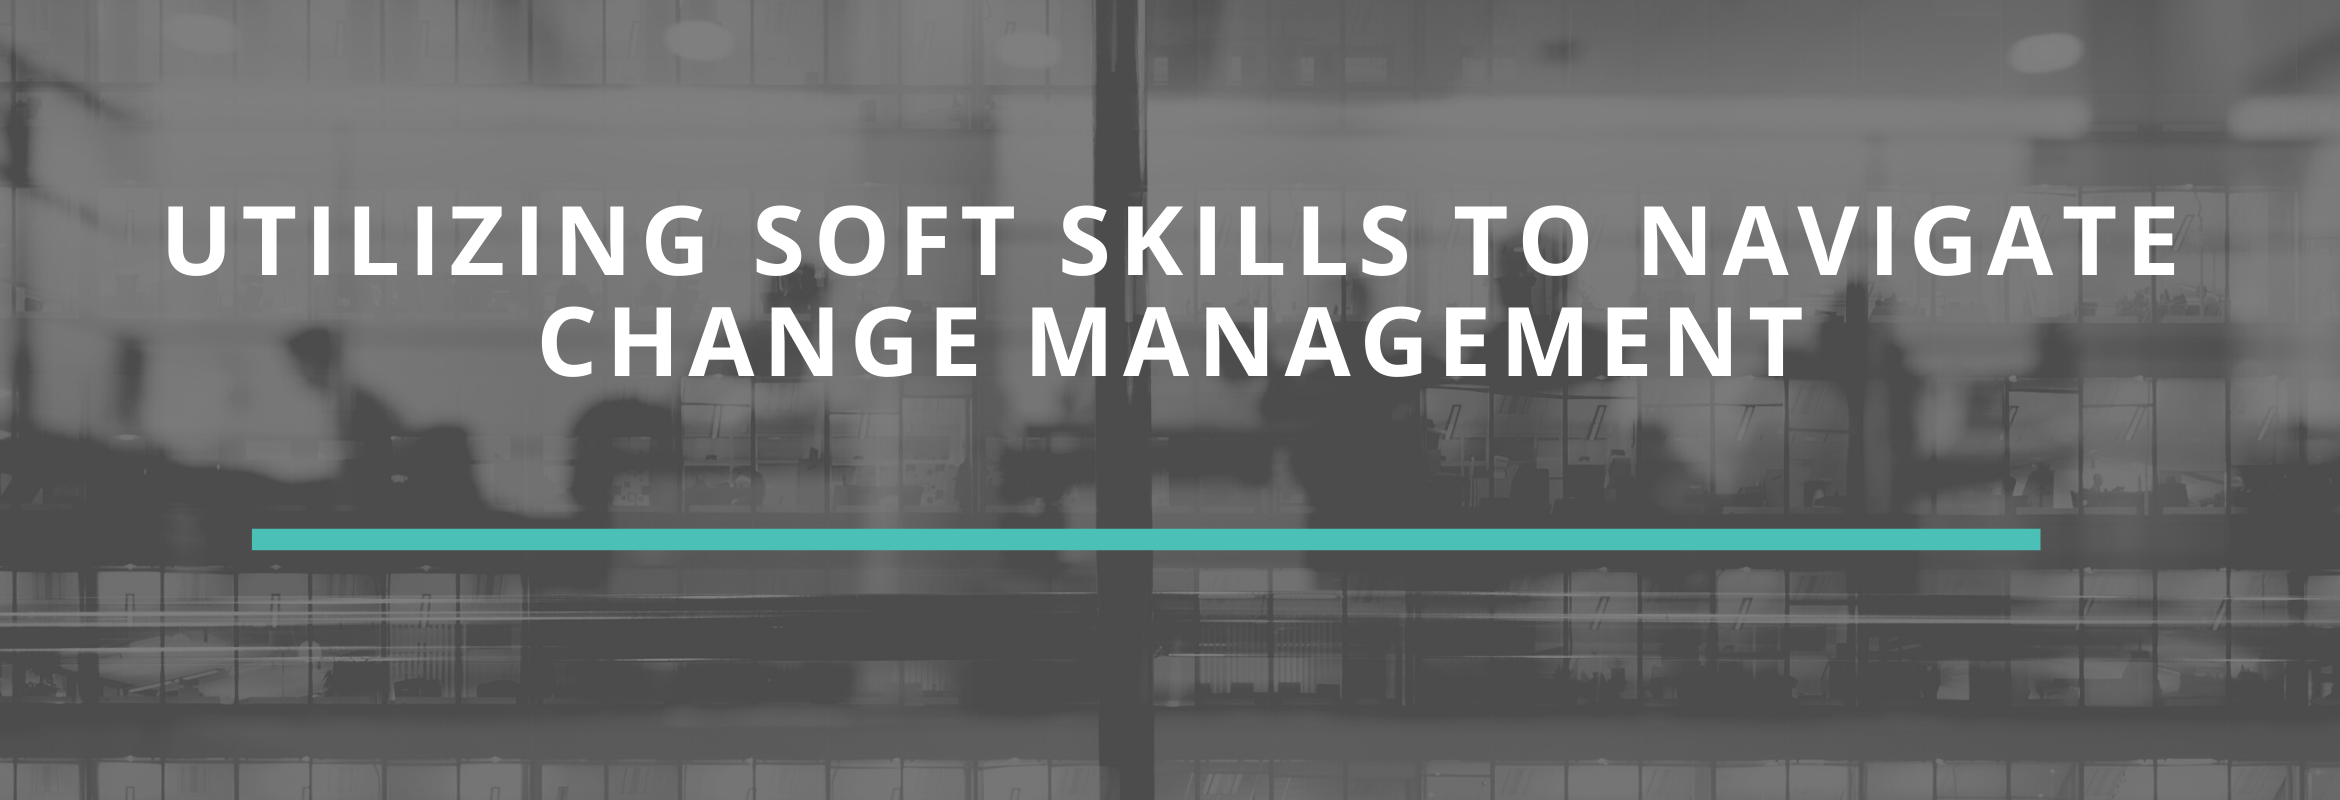 Kimberly Morelli discusses how essential components such as soft skills and change management can be.